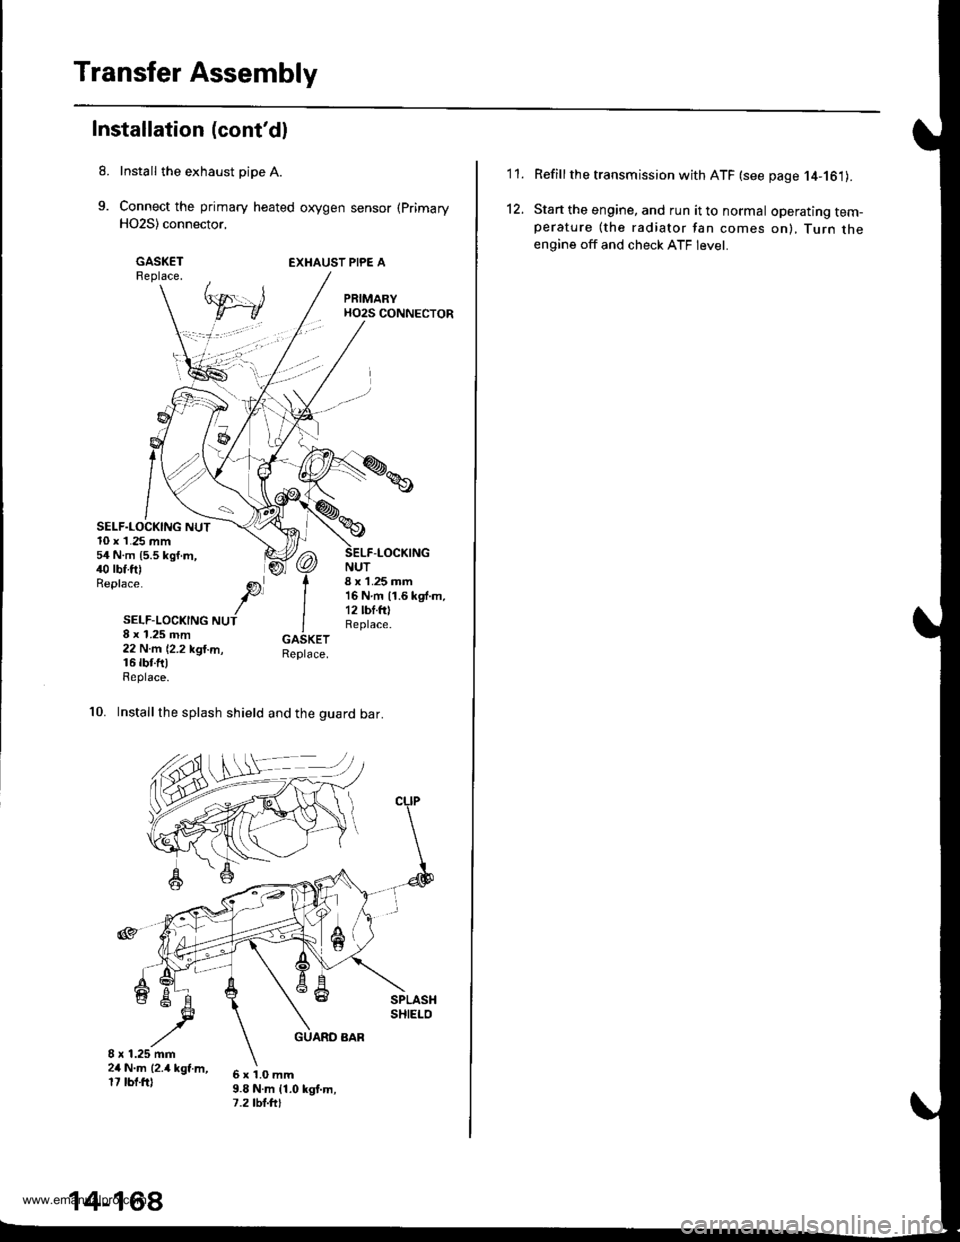 HONDA CR-V 1998 RD1-RD3 / 1.G Service Manual 
Transfer Assembly
Installation (contdl
Install the exhaust pipe A.
Connect the primary heated oxygen sensor (Primary
H02S) connector,
GASKETReplace.EXHAUST PIPE A
SELF.LOCKING NUT10 x 1.25 mm54 N.m 